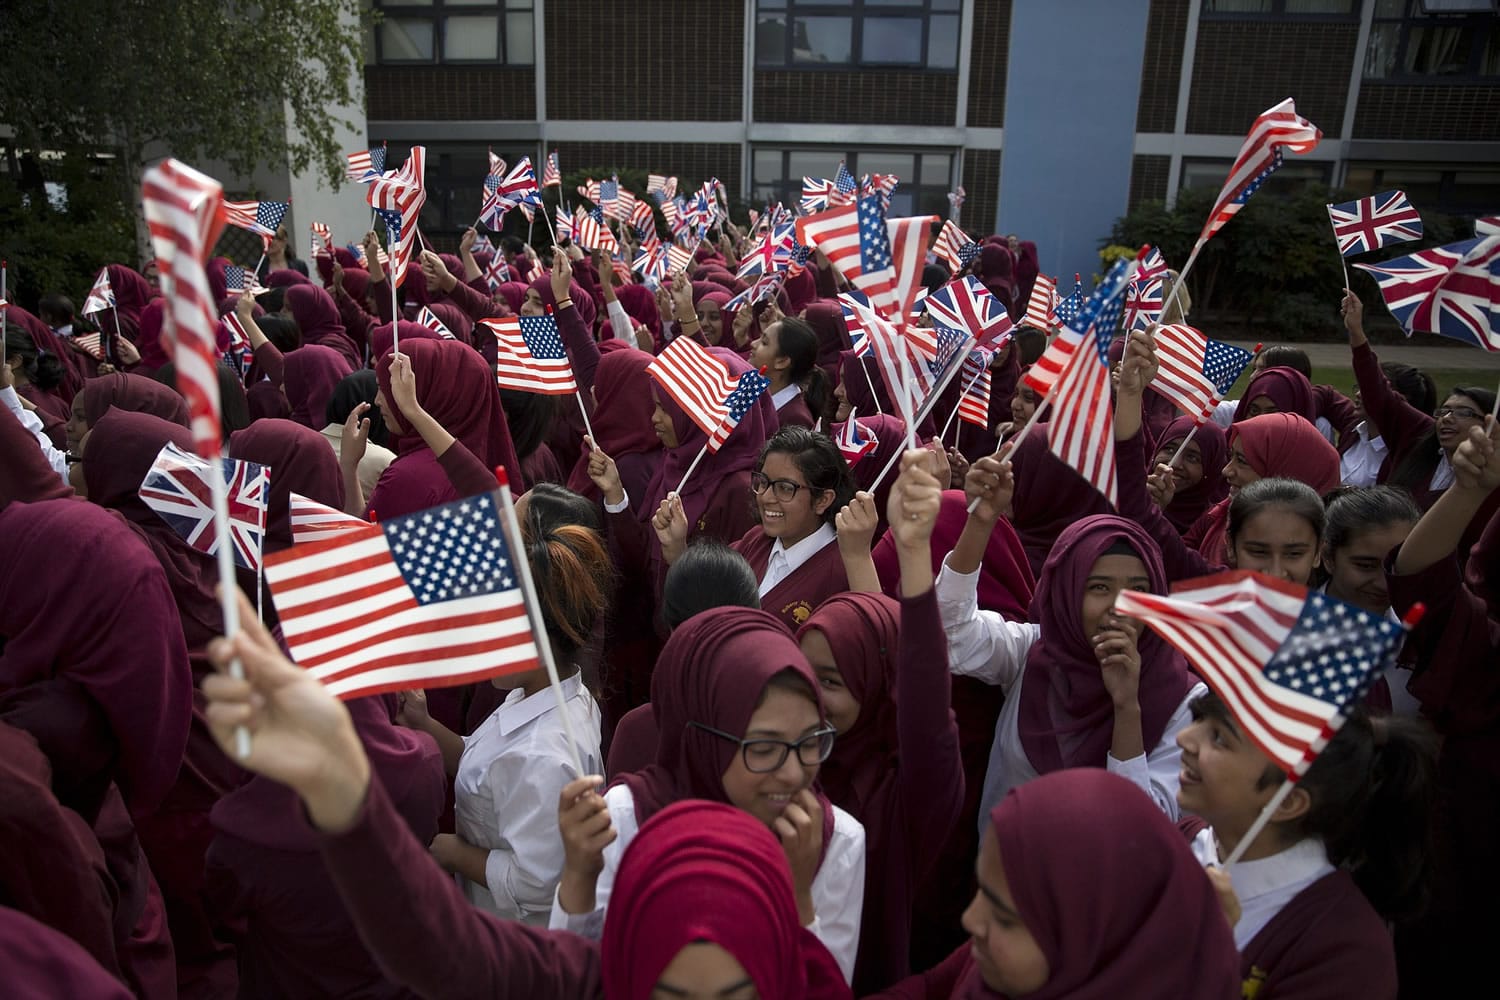 Students cheer and wave flags as they wait for the arrival of U.S. first lady Michelle Obama on her visit to Mulberry School for Girls in east London on Tuesday. Schoolgirls in east London greeted U.S.